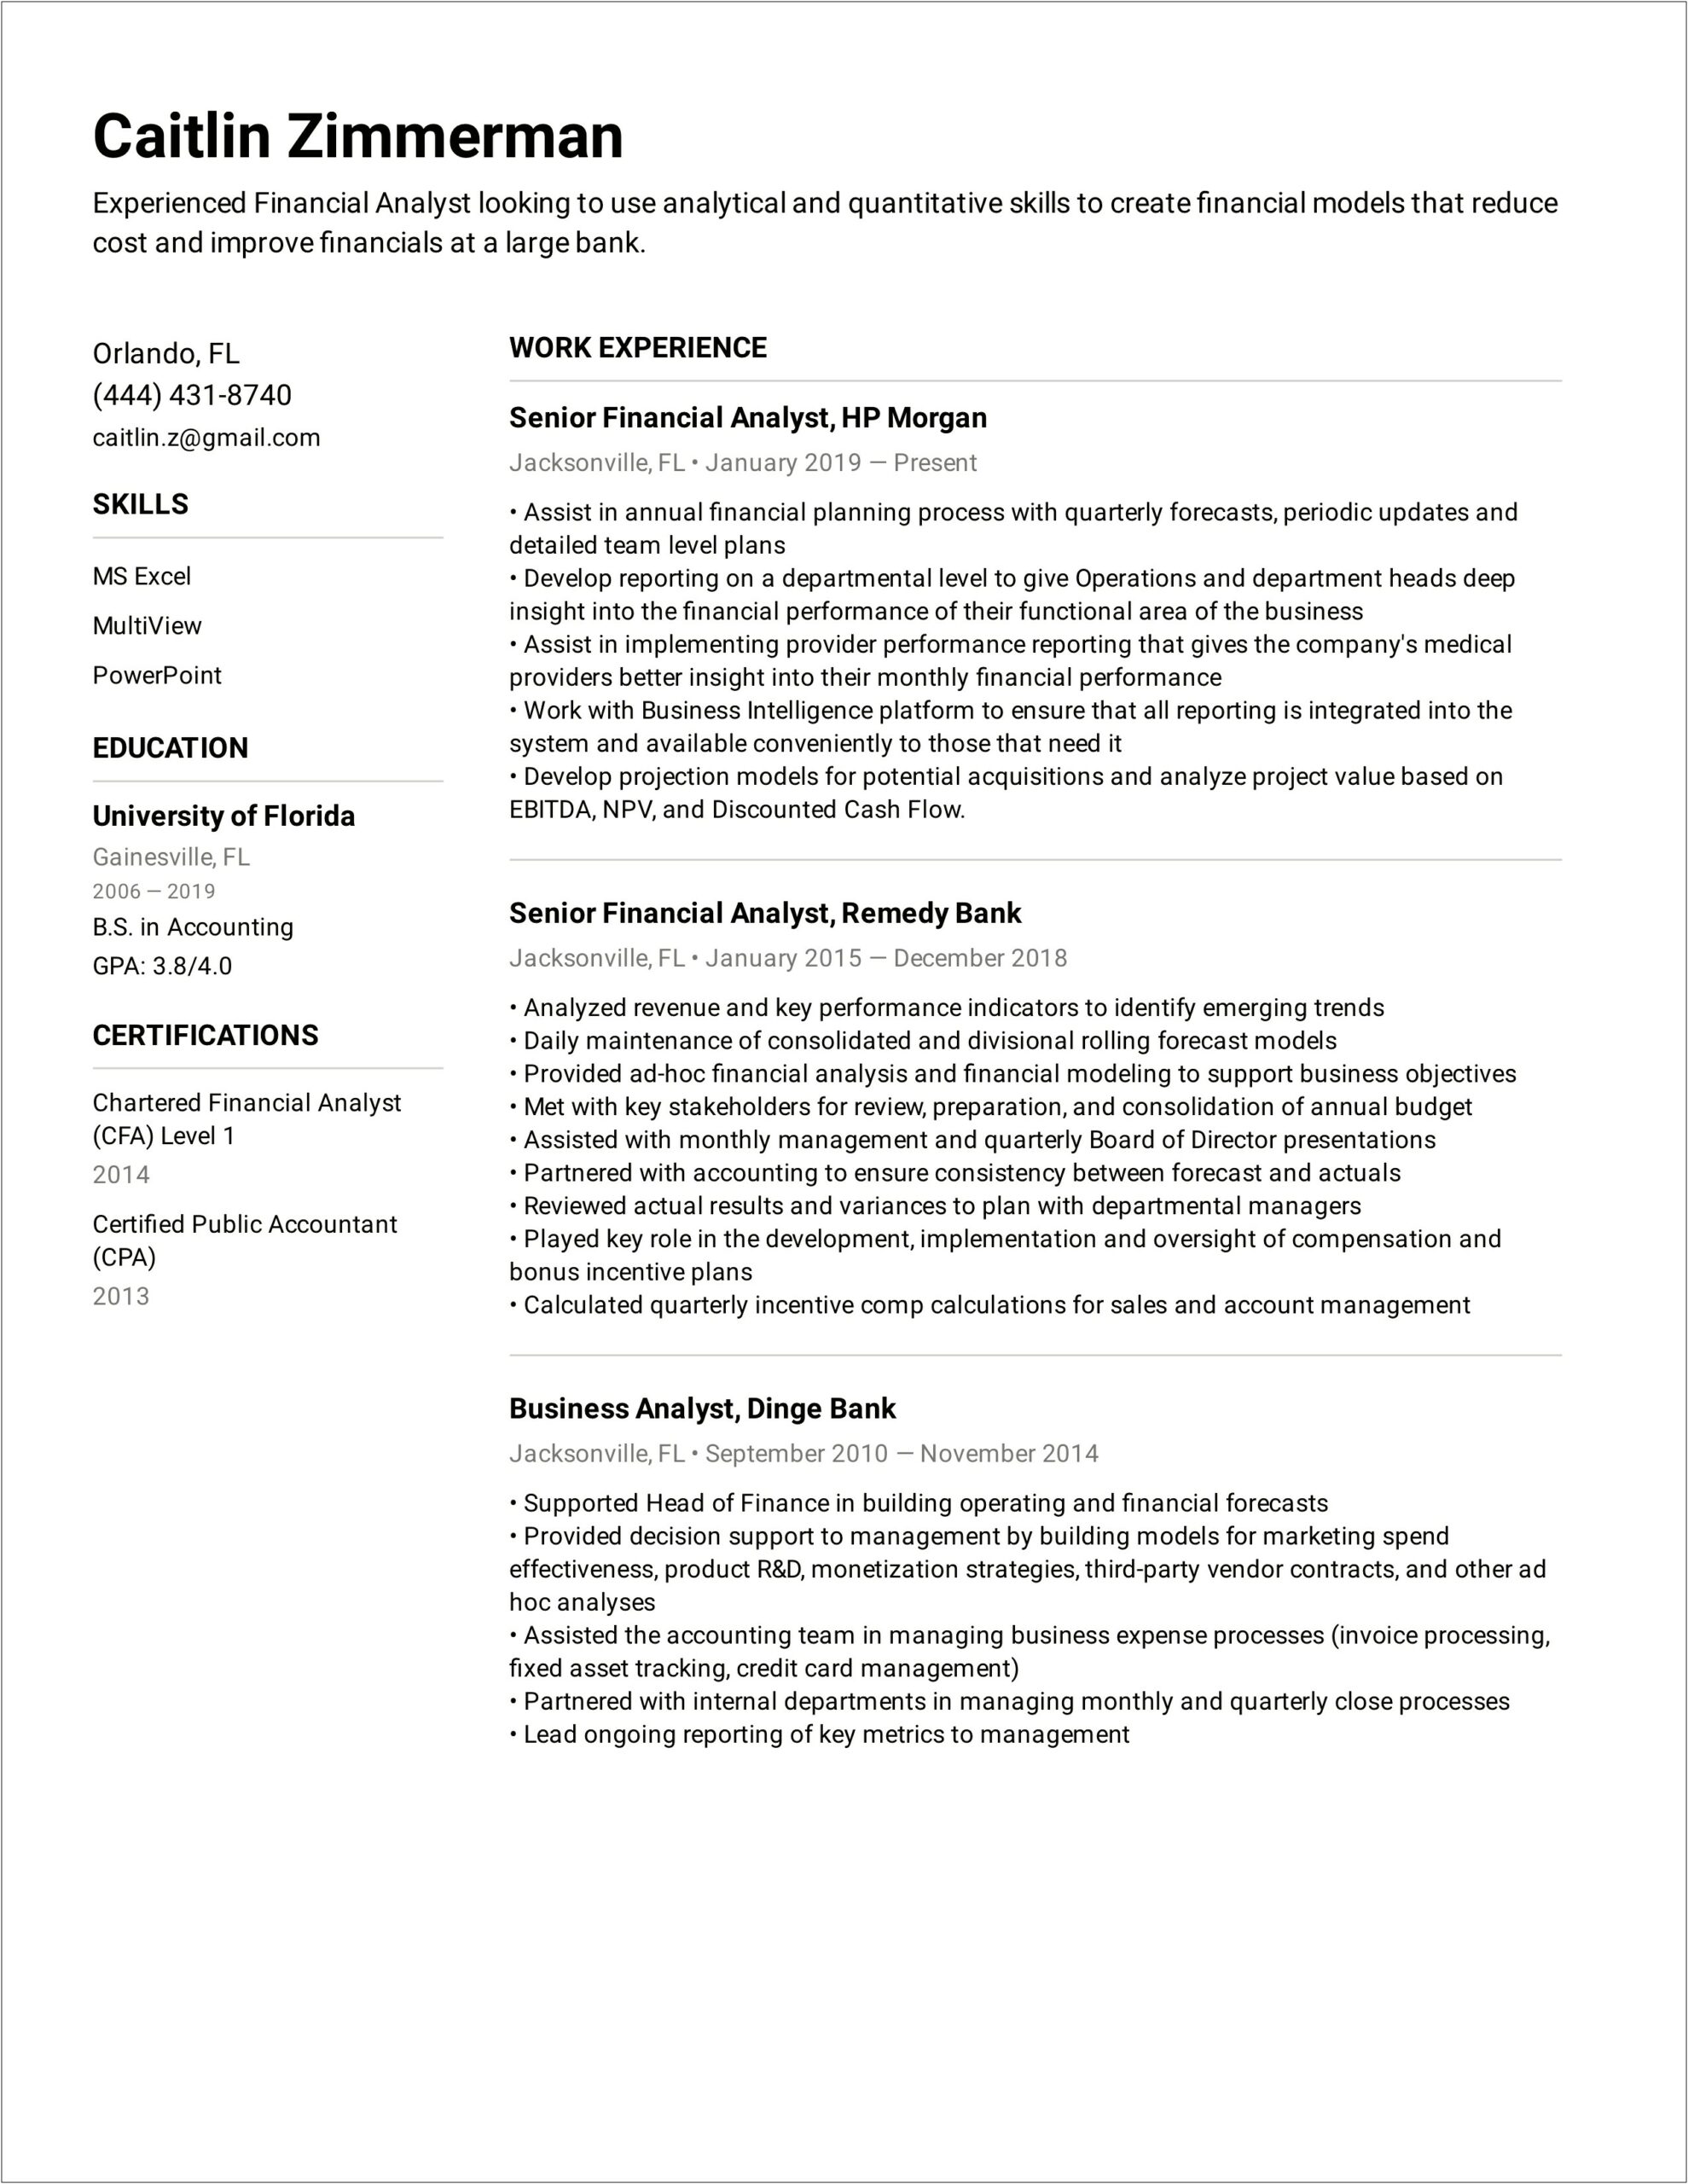 Financial Analyst At Marketing Agency Resume Sample